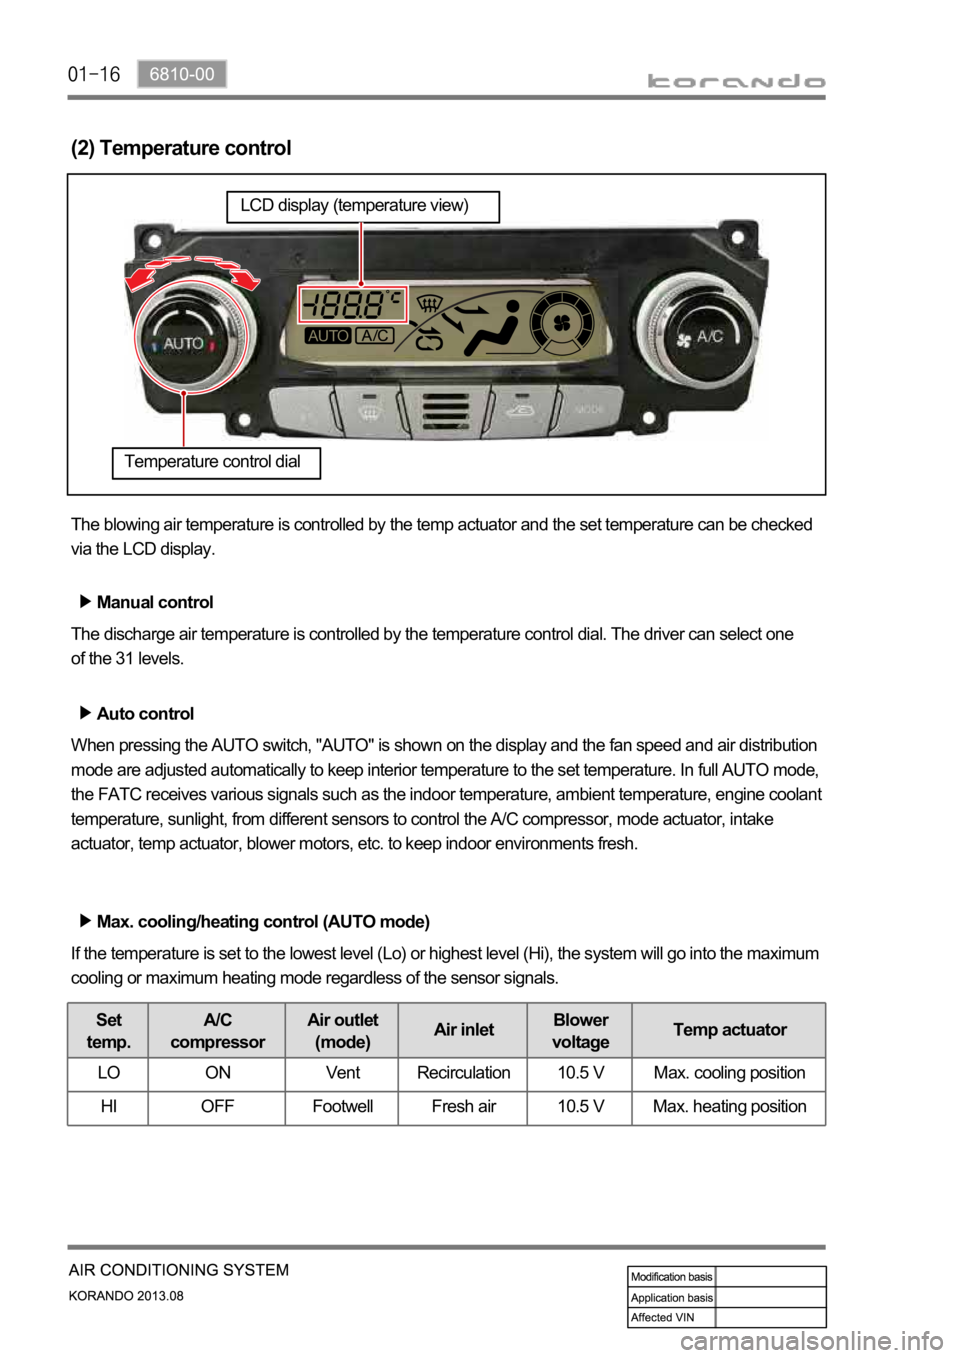 SSANGYONG KORANDO 2013  Service Manual (2) Temperature control
The blowing air temperature is controlled by the temp actuator and the set temperature can be checked 
via the LCD display. 
Manual control
The discharge air temperature is con